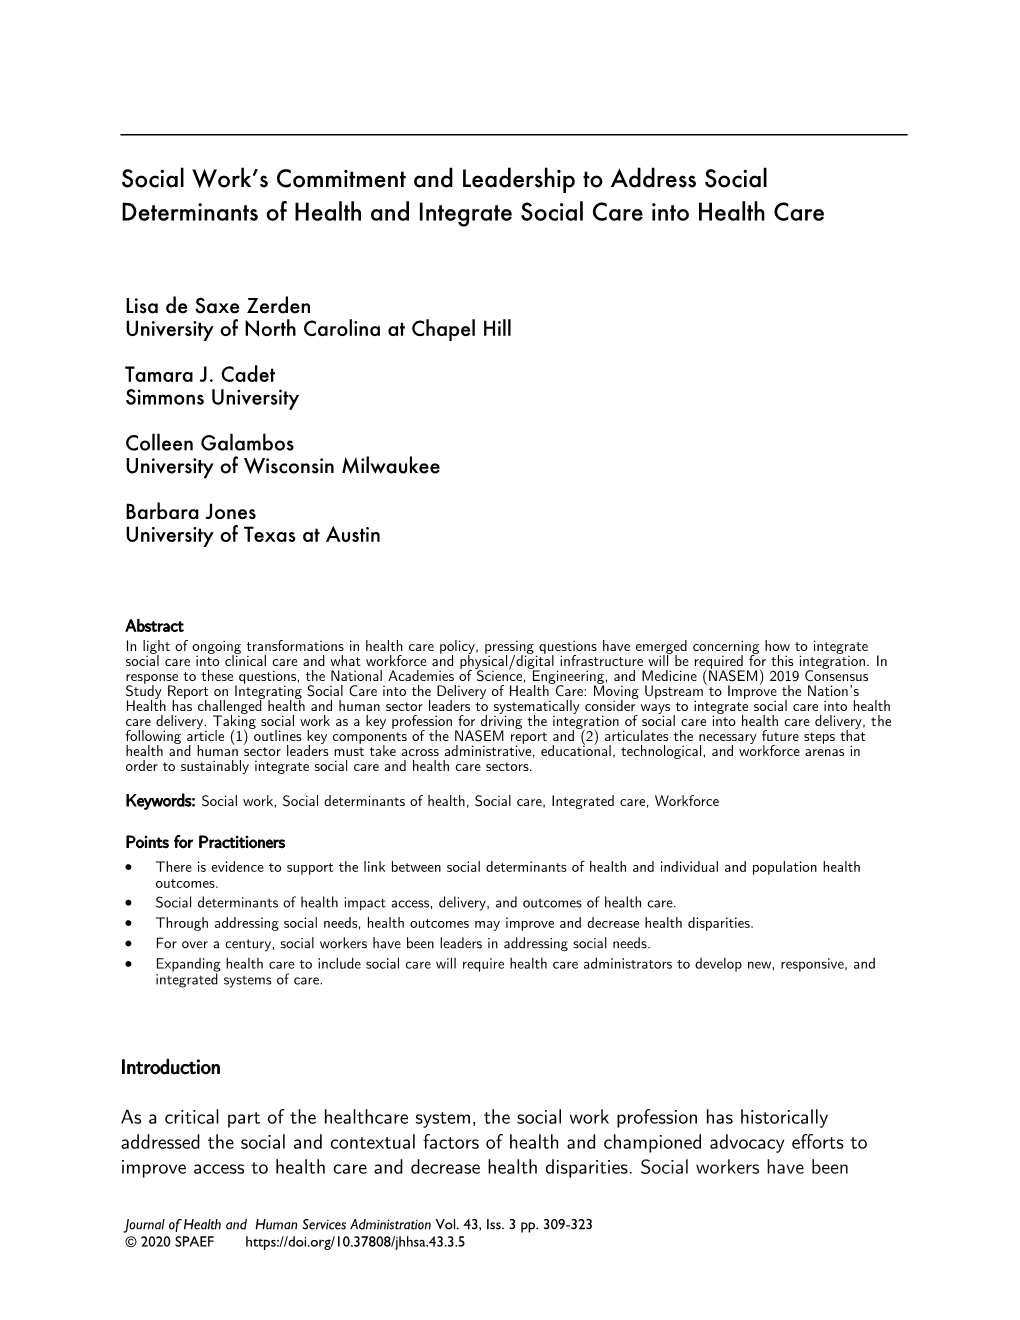 Social Work's Commitment and Leadership to Address Social Determinants of Health and Integrate Social Care Into Health Care